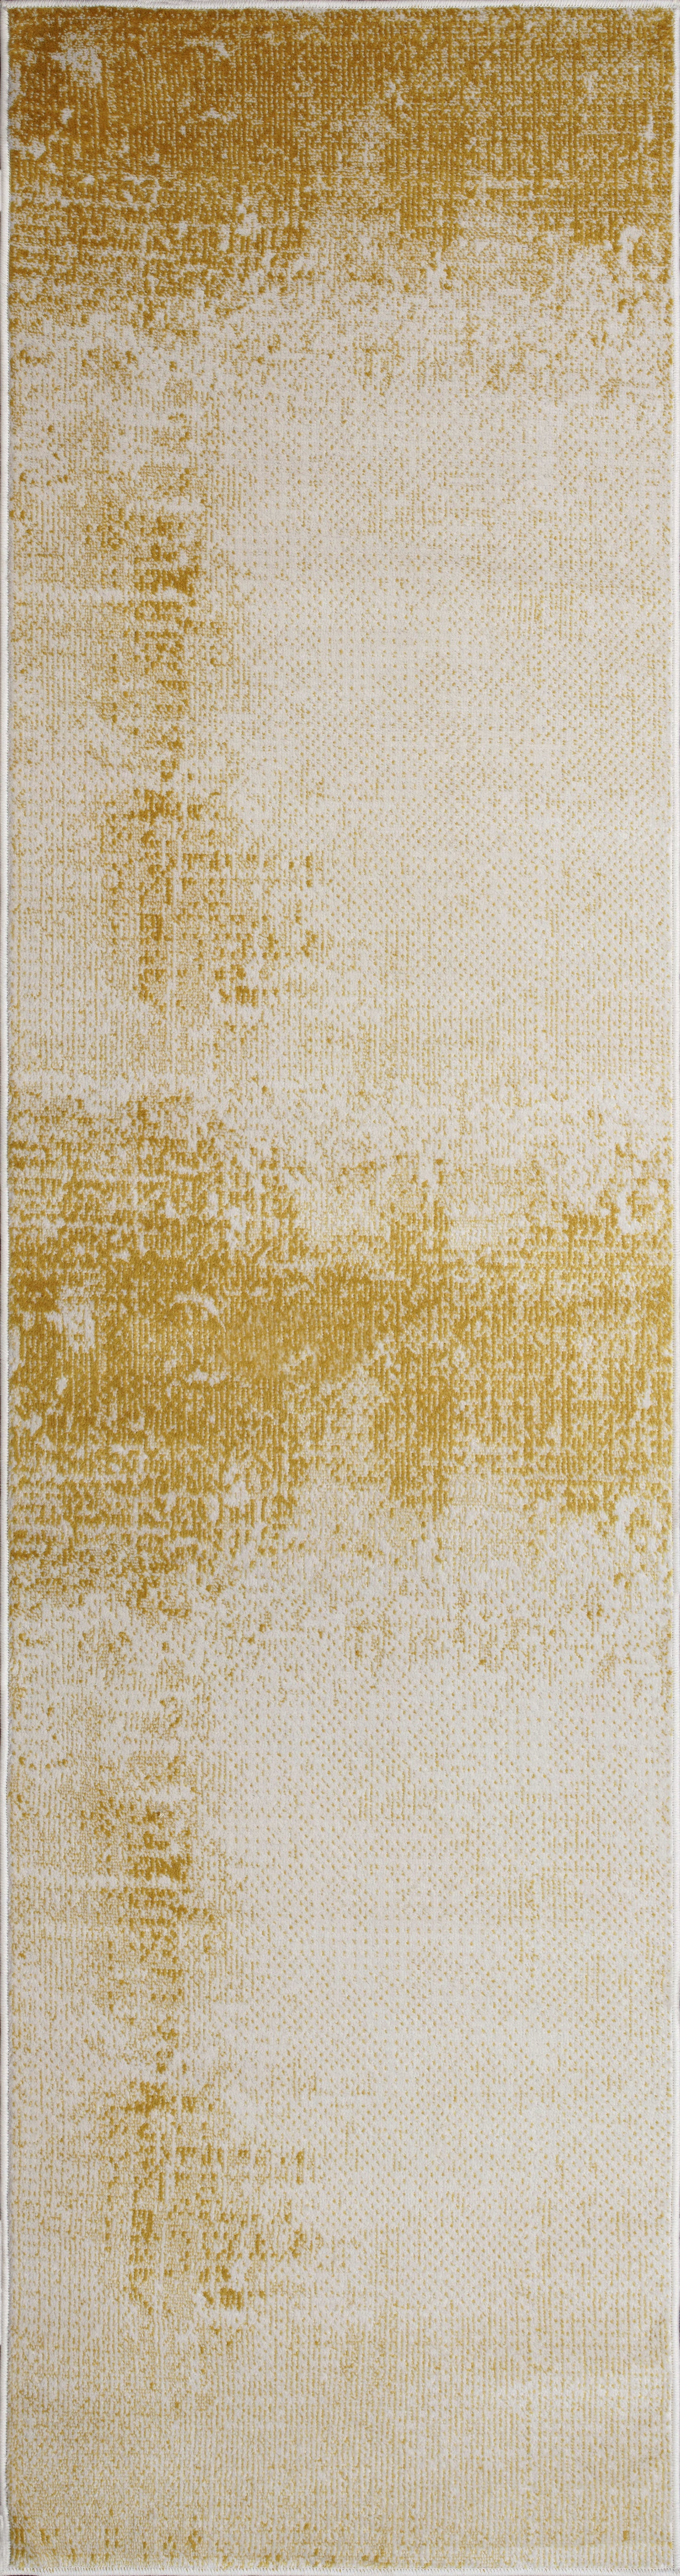 Azra Yellow Mustard Canary Amber Abstract Contemporary Marble Minimal Design Area Rug